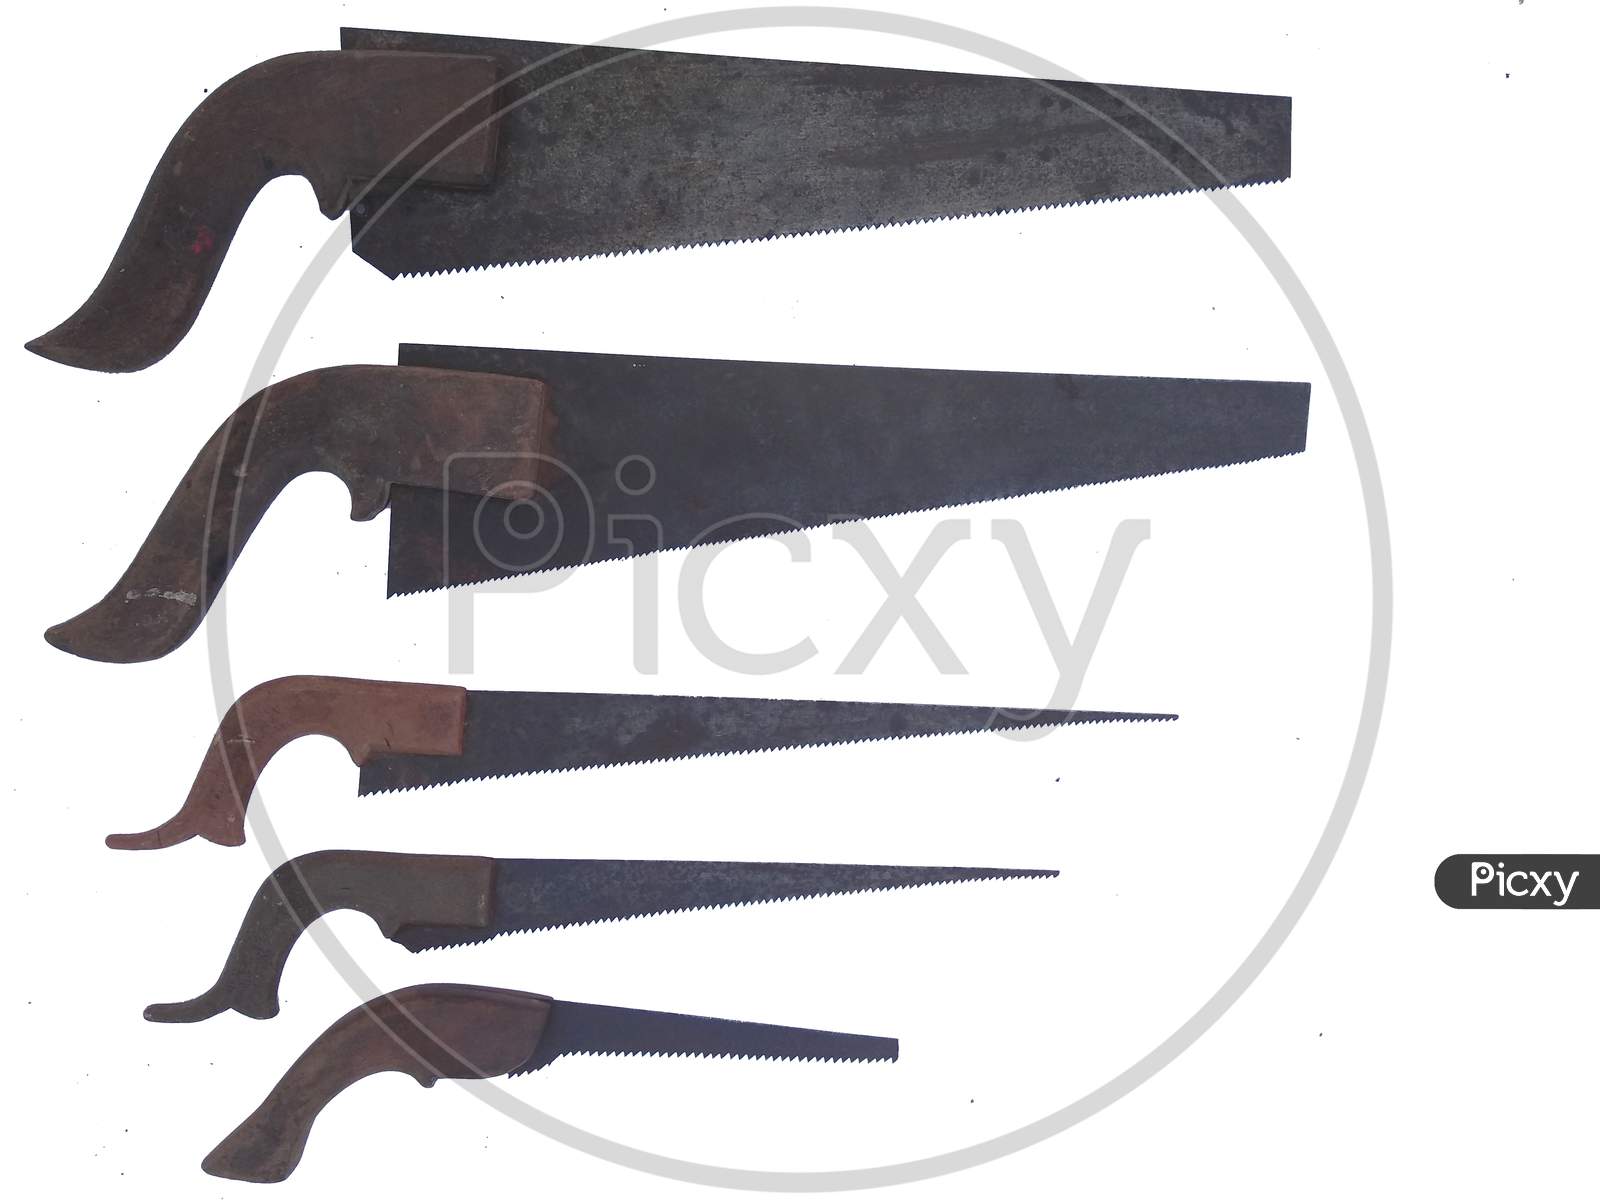 Image Of Different Sizes Of Old Hand Saw Isolated On White Background.